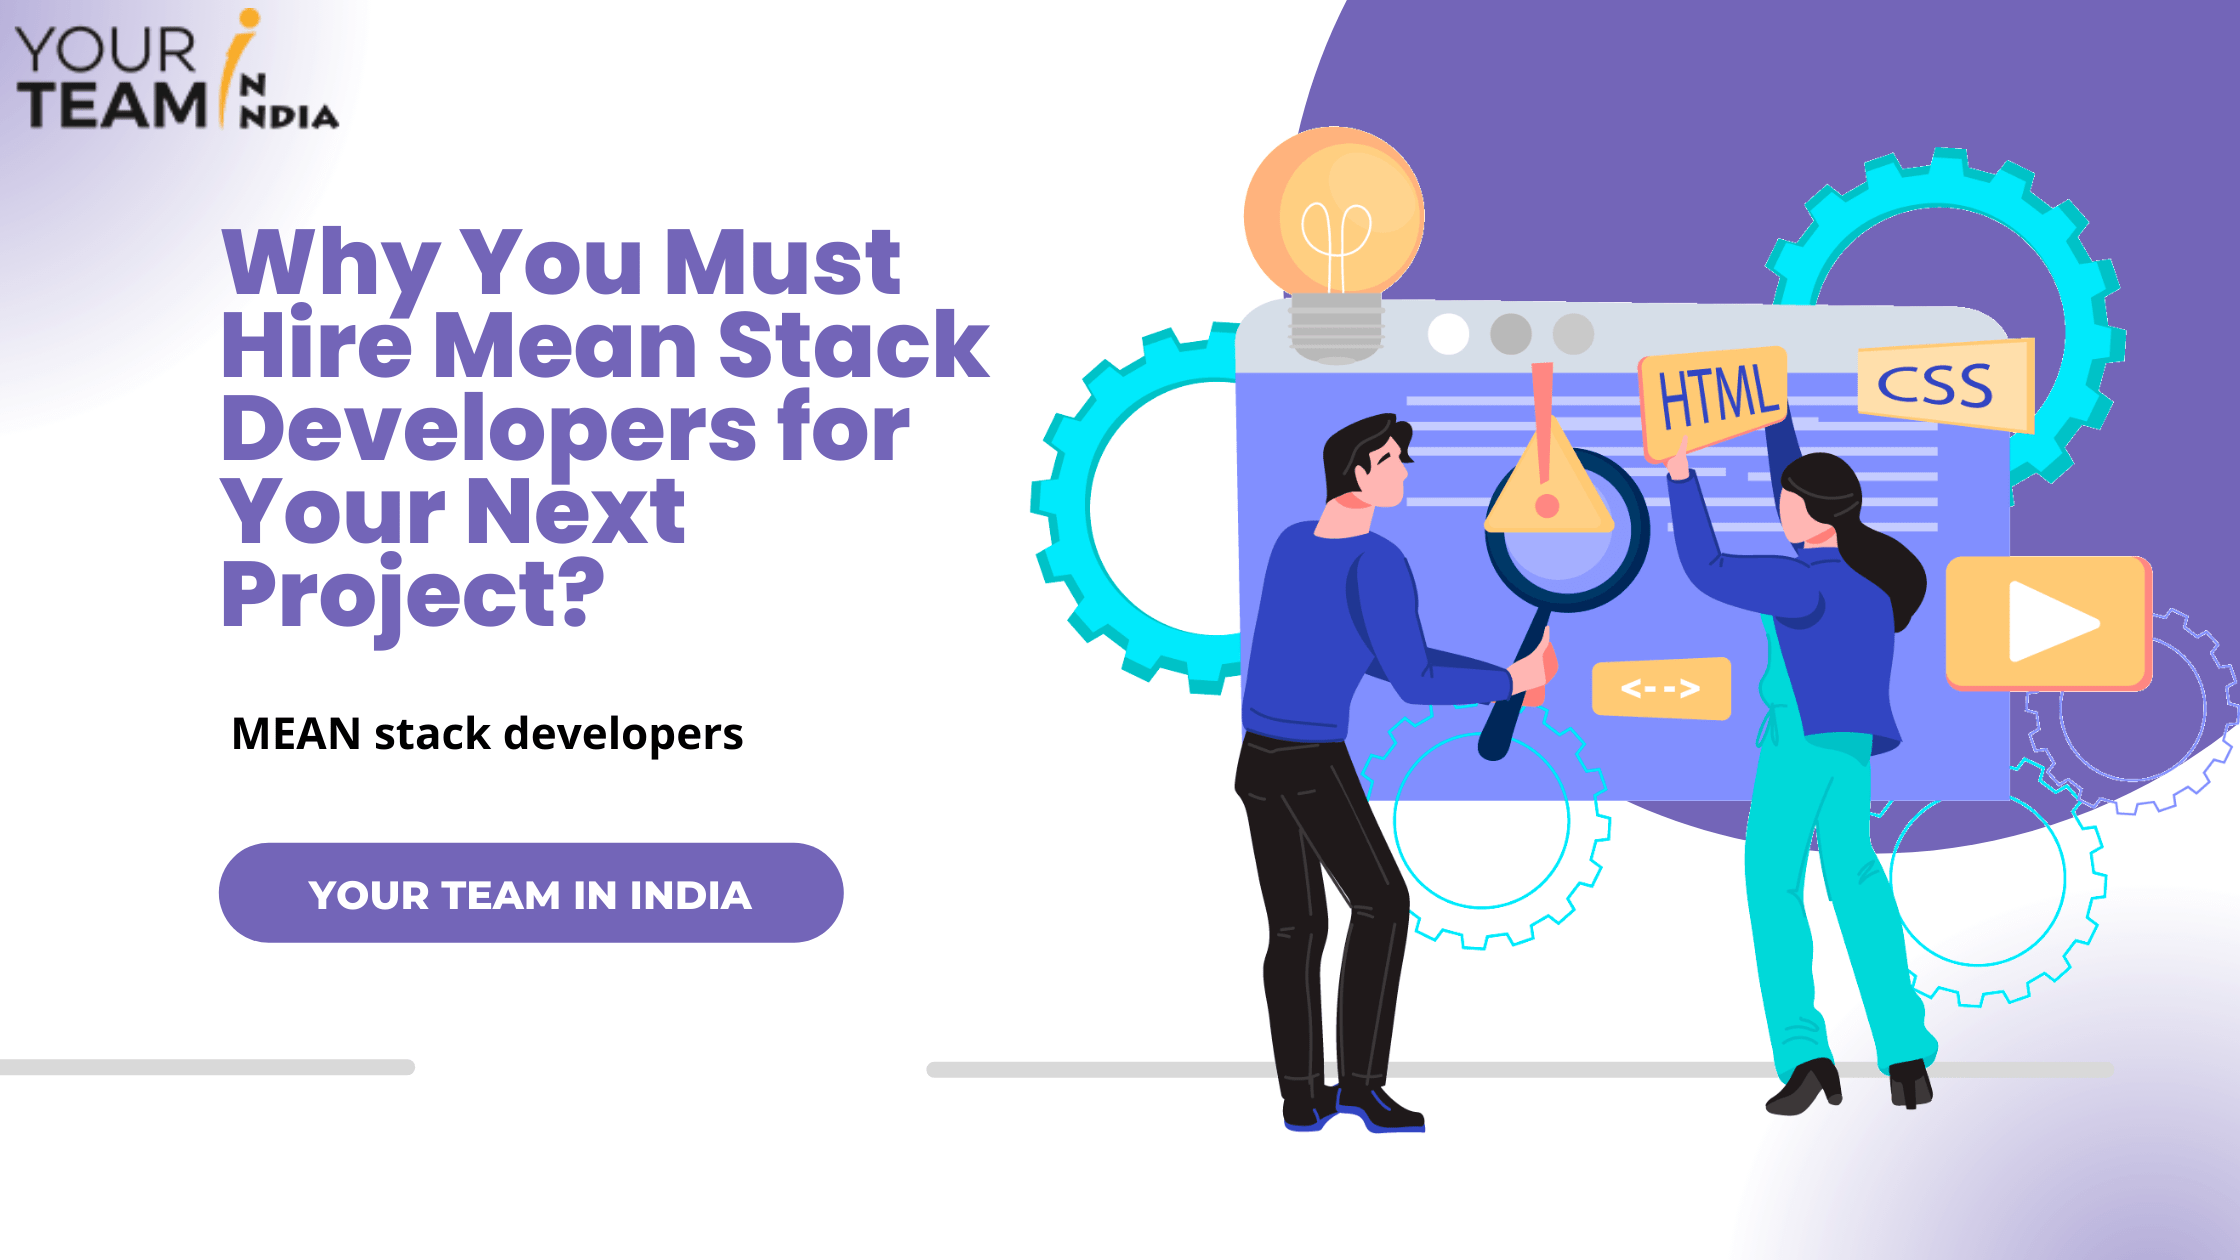 Why You Must Hire Mean Stack Developers for Your Next Project?